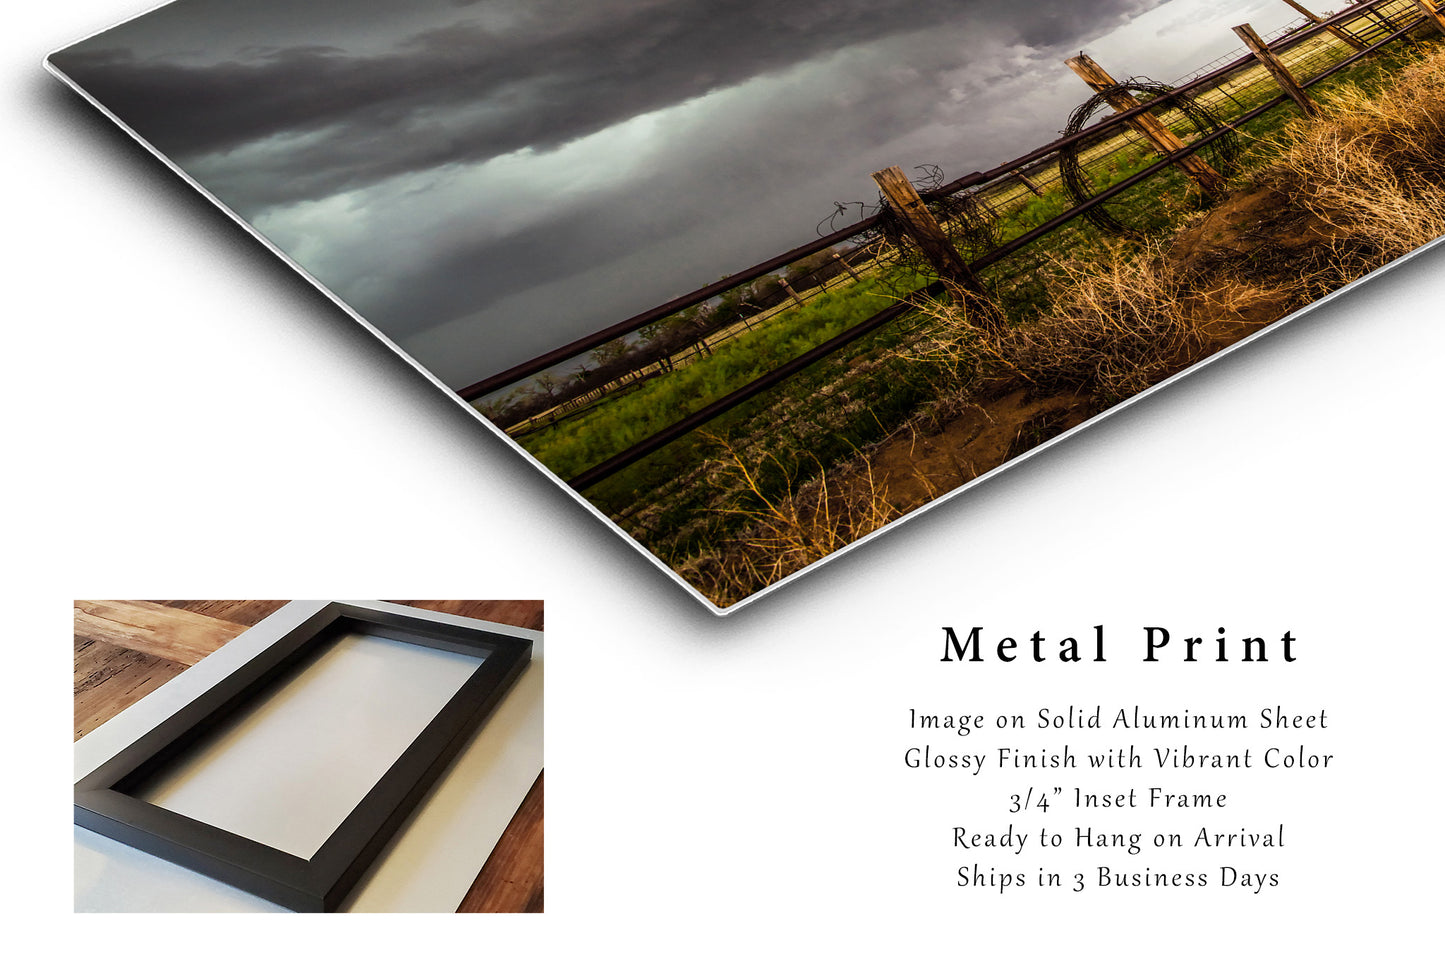 Western Metal Print - Picture of Storm Advancing Over Barbed Wire Fence on Stormy Day in Oklahoma - Ready to Hang Country Wall Art Decor